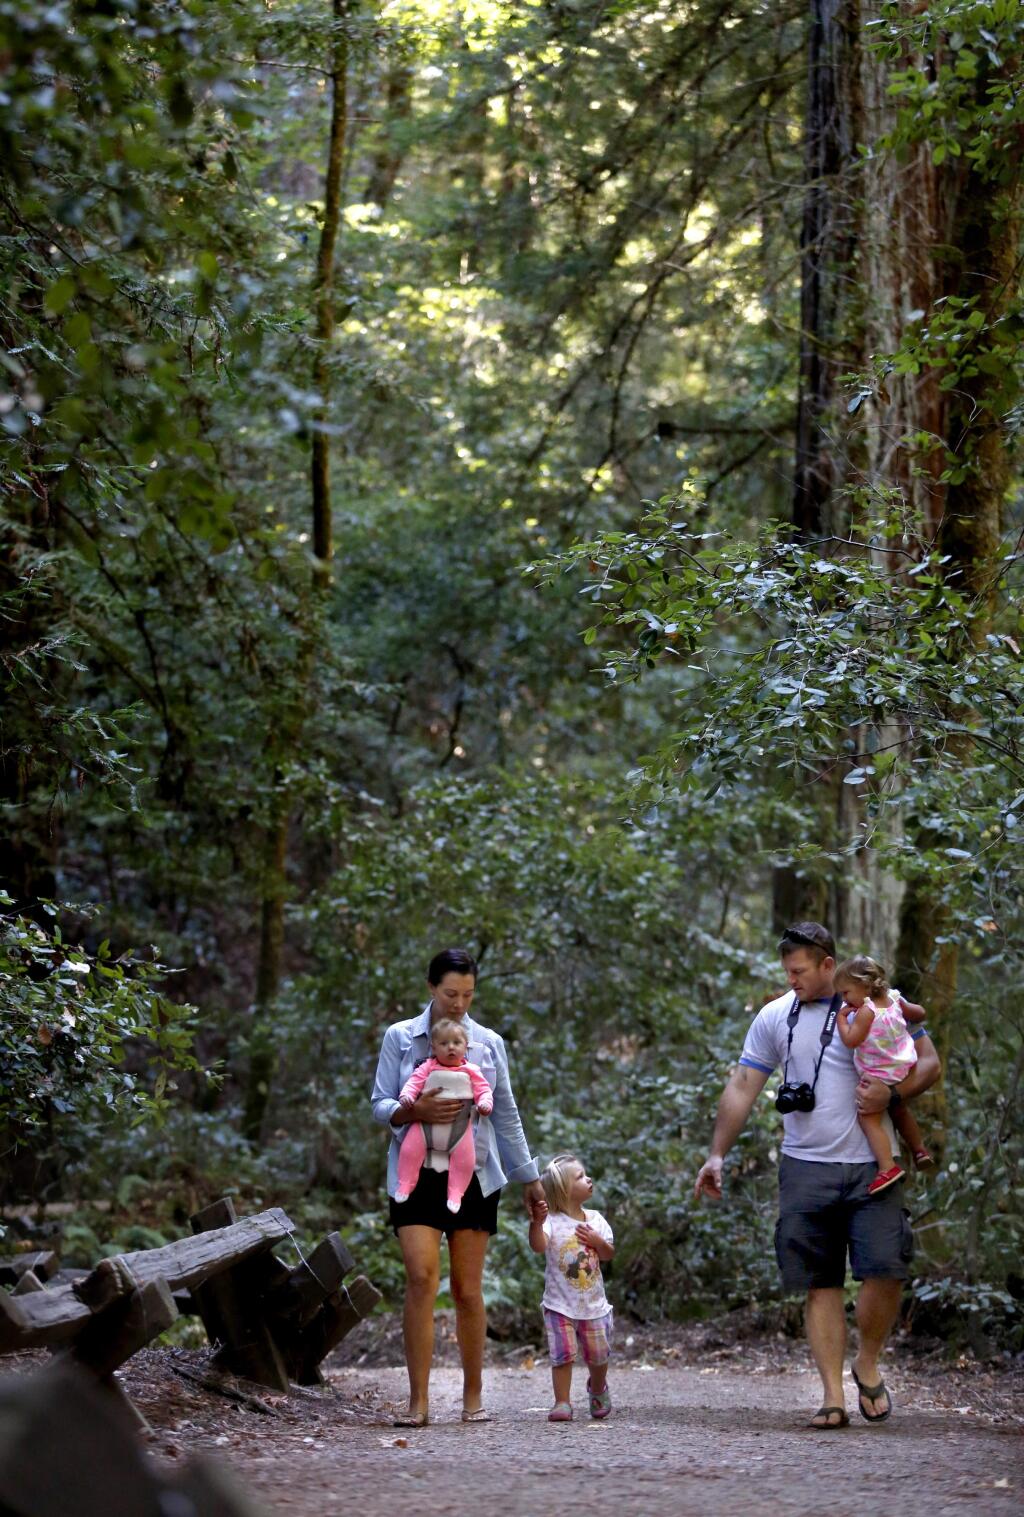 Kelly Norris, her husband, Bryan, and their three daughters Laila, 2, center, Kinley, 1, right, and Hannah, 6-months, walk together at Armstrong Woods State Natural Reserve in Guerneville, California on Sunday, October 5, 2014. (BETH SCHLANKER/ The Press Democrat)